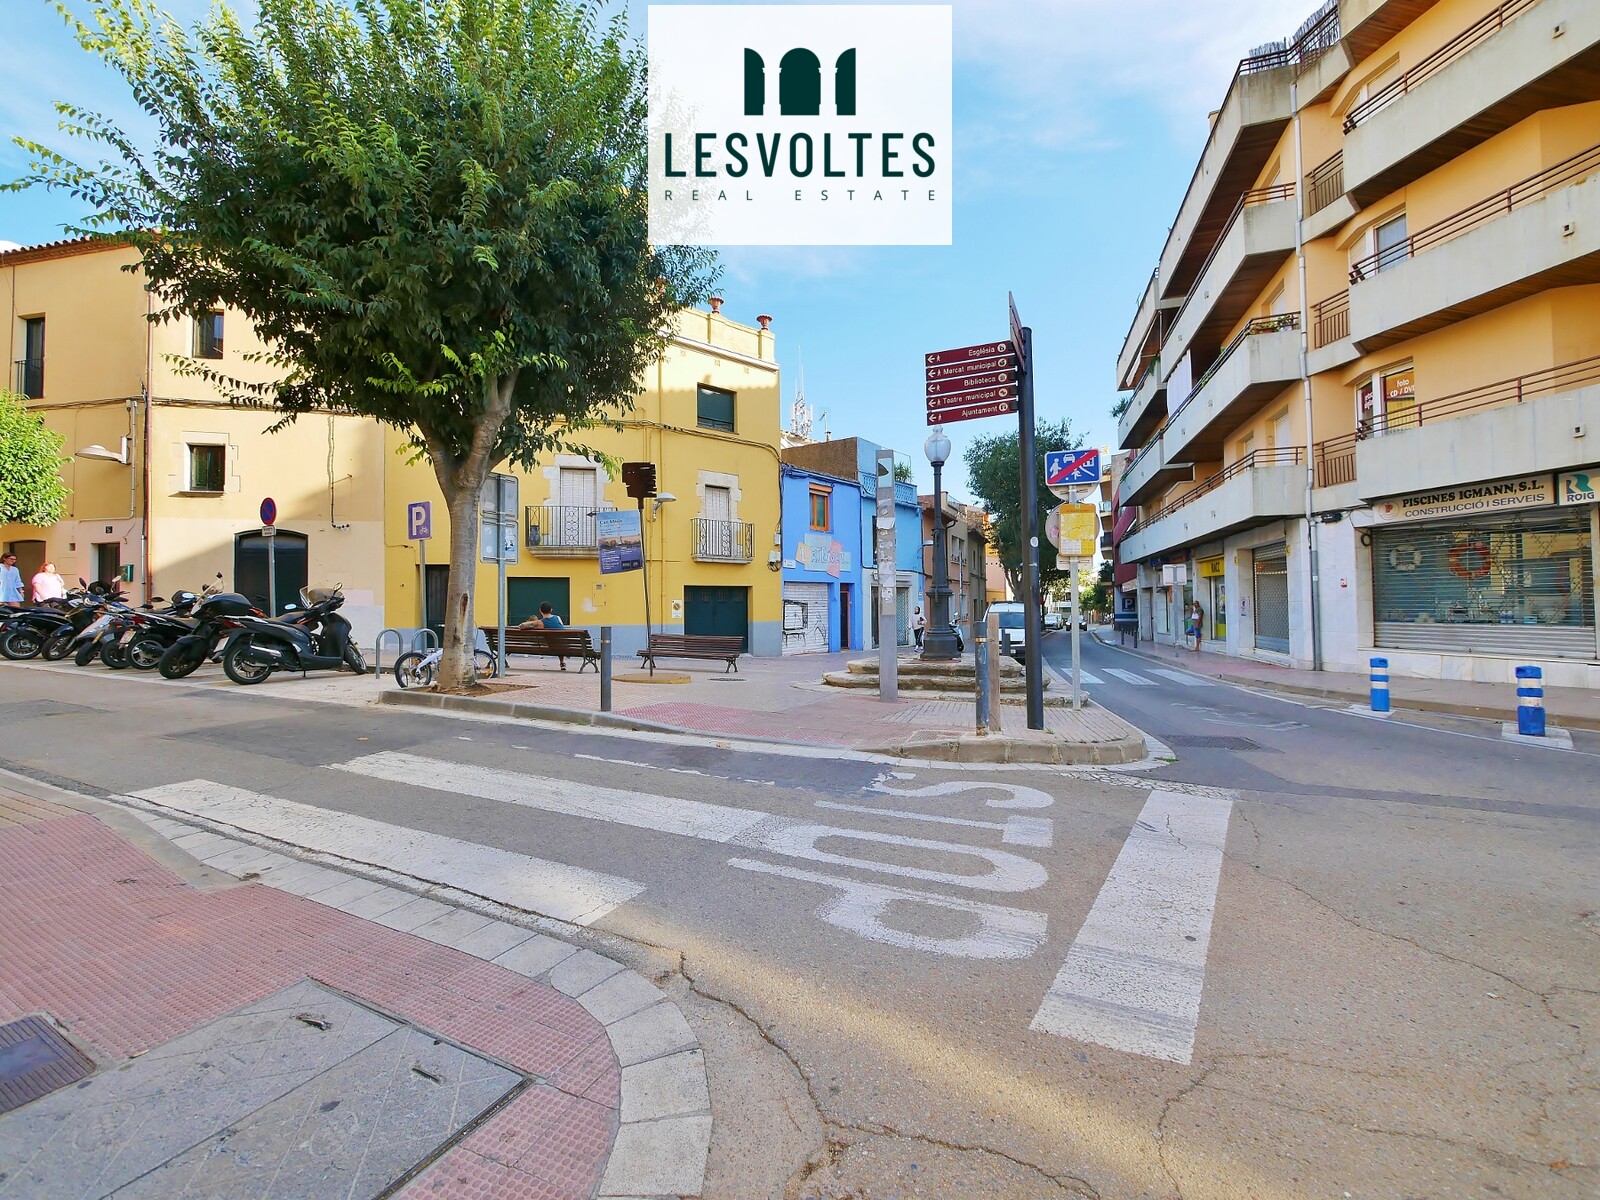 OPPORTUNITY! HOUSE IN THE CENTER OF PALAFRUGELL WITH A LARGE TERRACE AND GROUND FLOOR ENABLED AS A COMMERCIAL. 